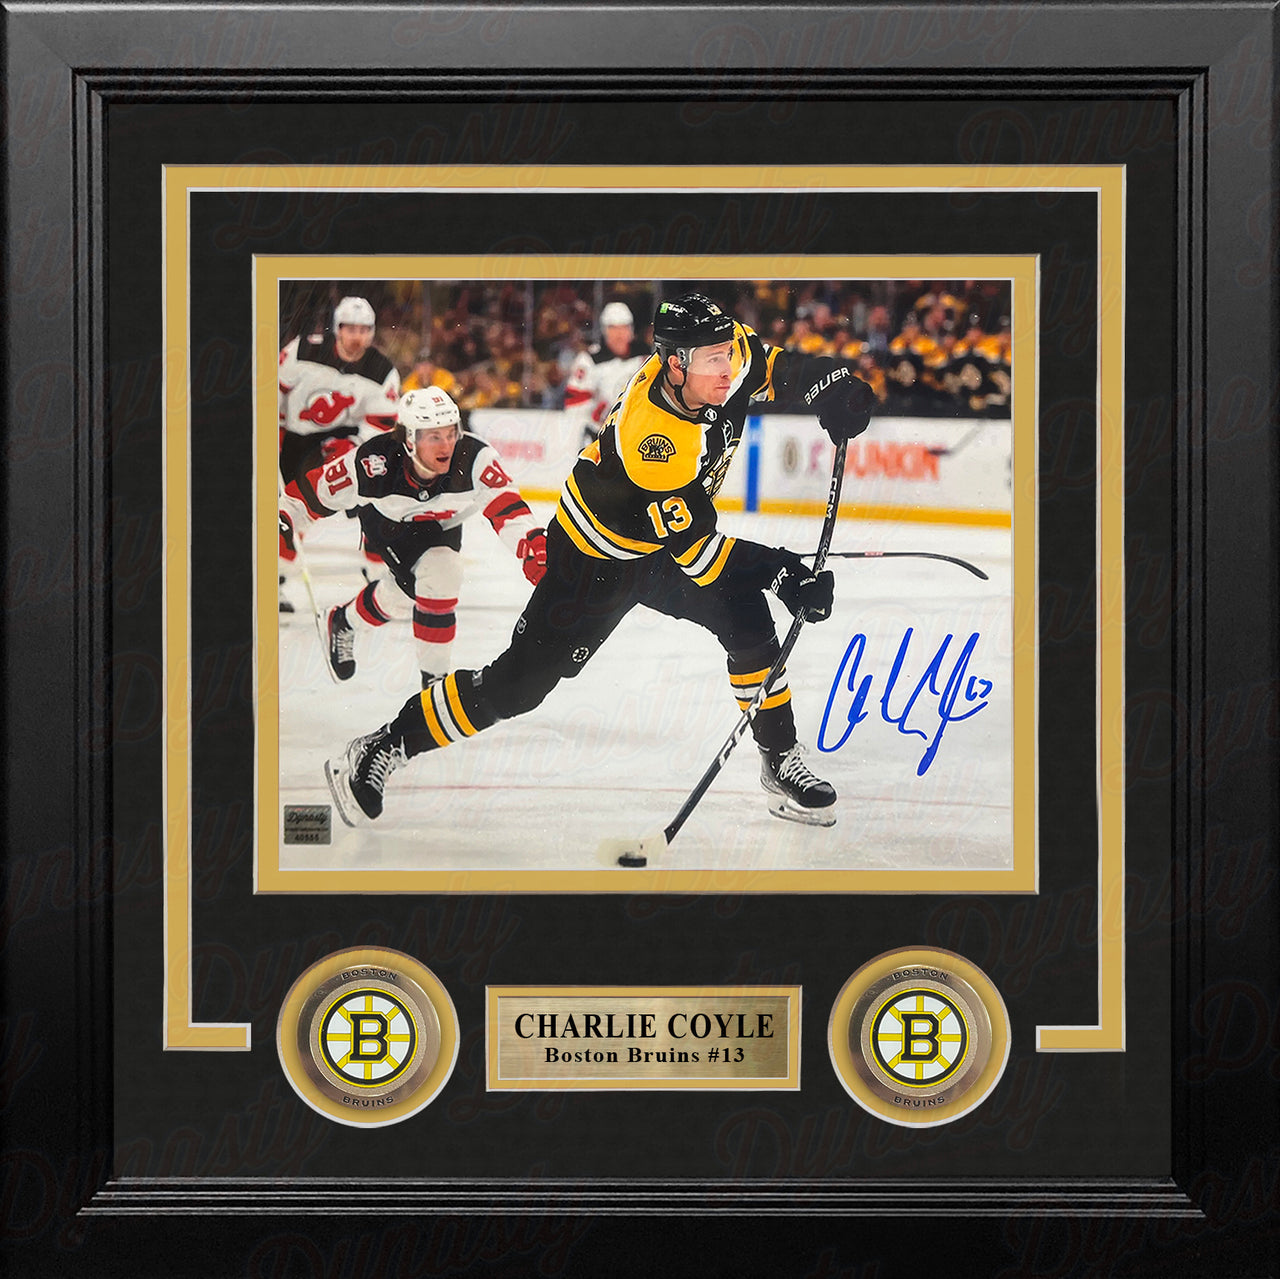 Charlie Coyle in Action Boston Bruins Autographed 8" x 10" Framed Hockey Photo